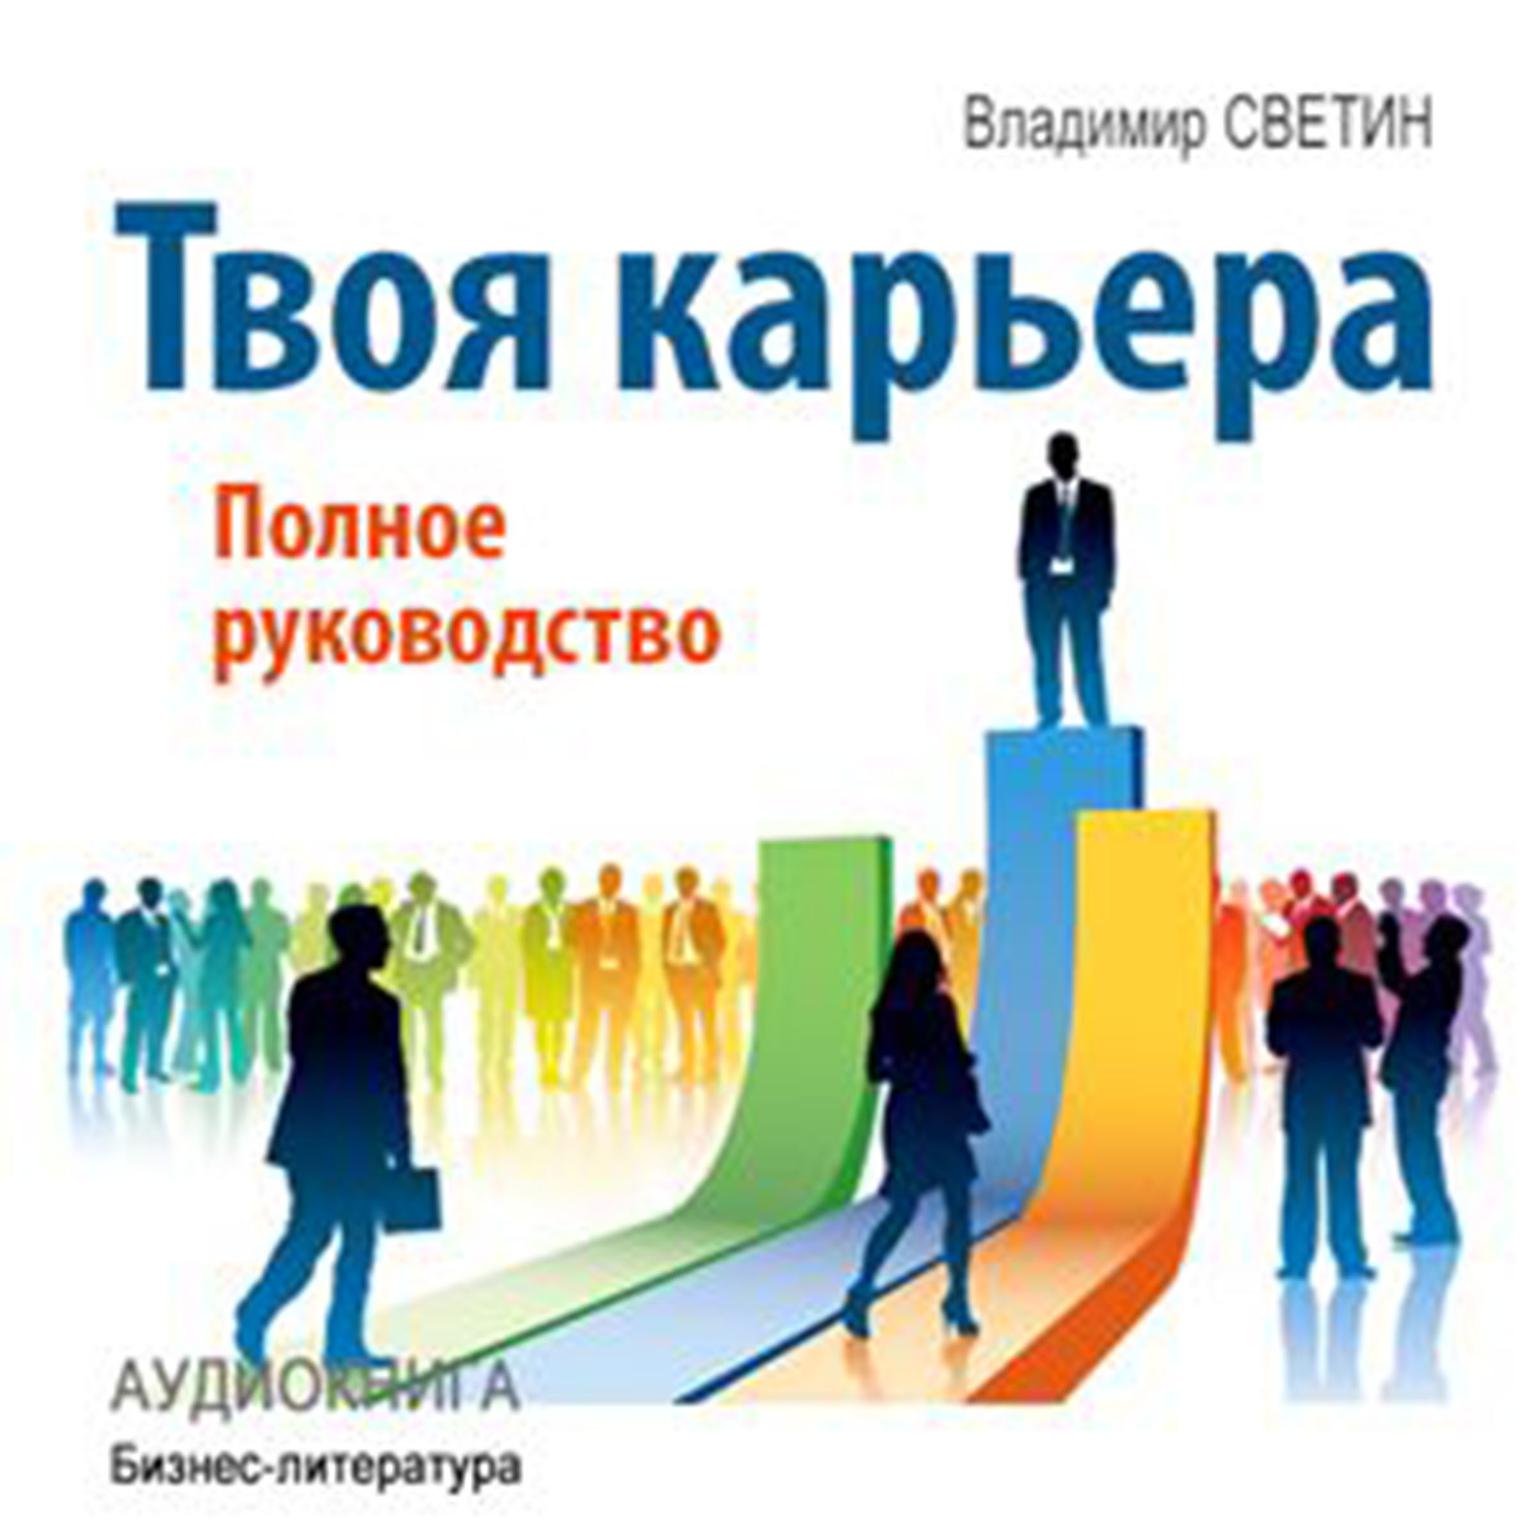 Your Career: The Complete Guide [Russian Edition] Audiobook, by Vladimir Svetin